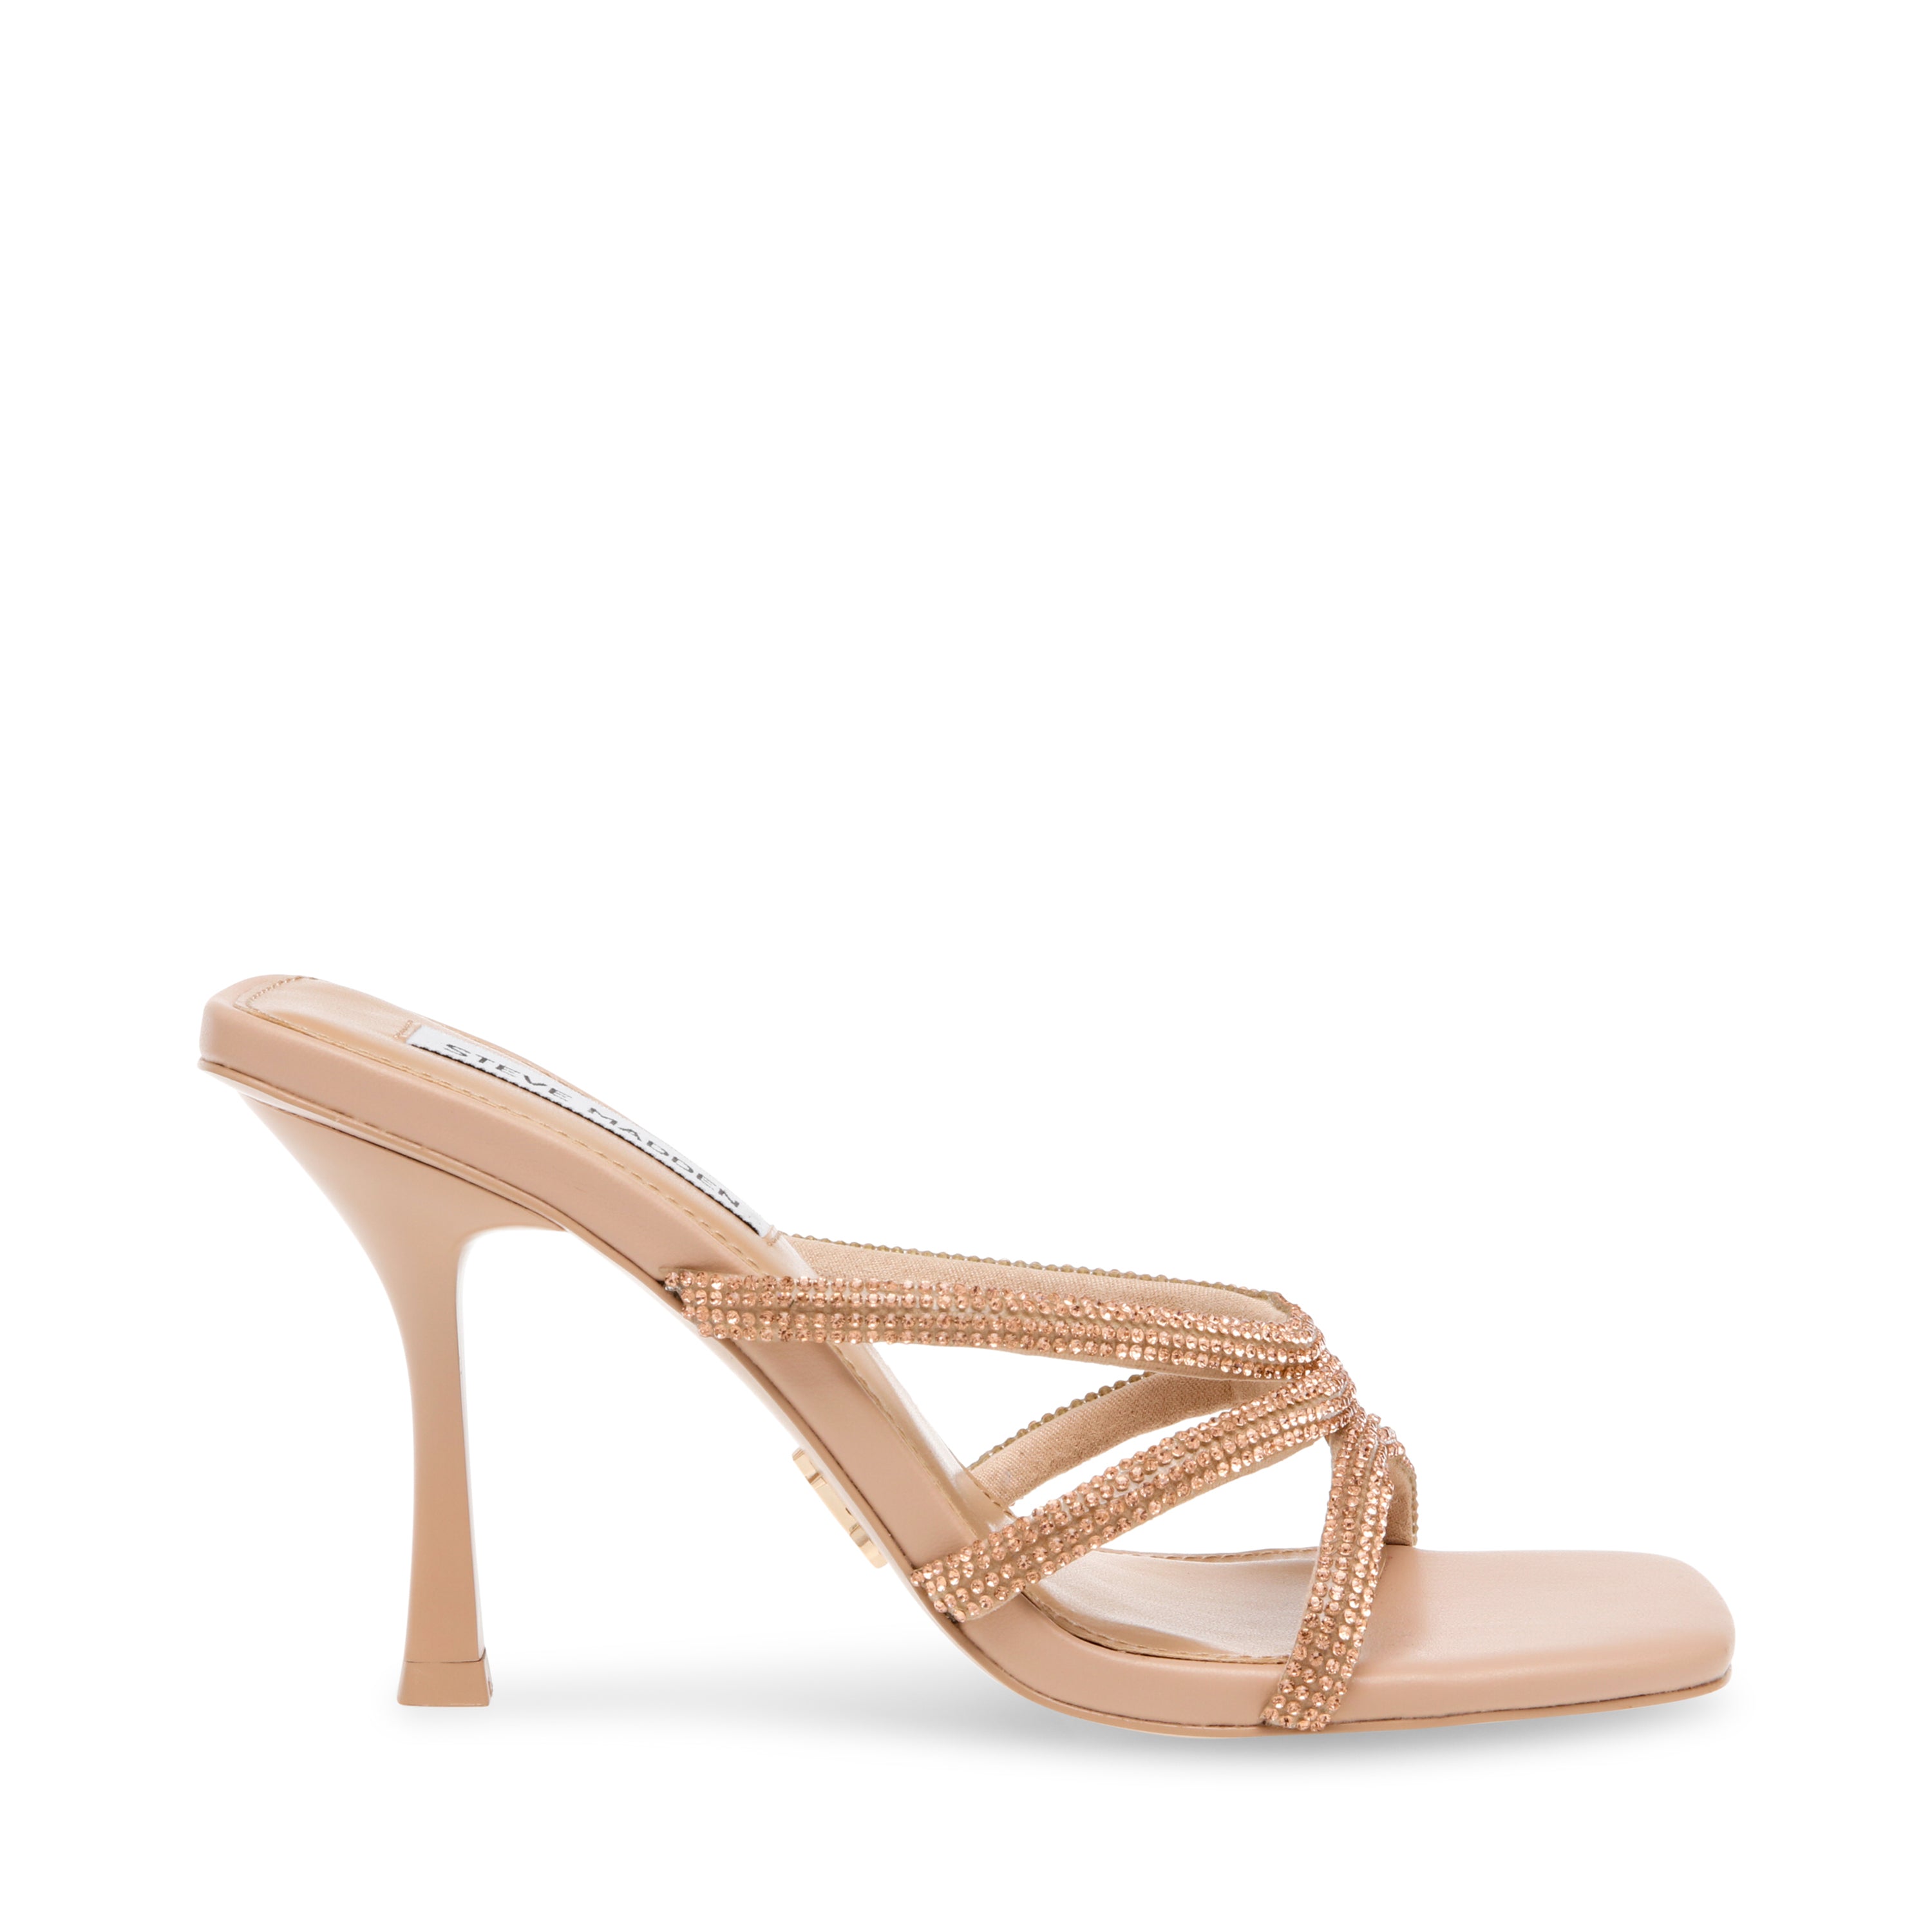 Buy Women ROSE GOLD INTRICACY ROSE GOLD Online by Steve Madden UAE